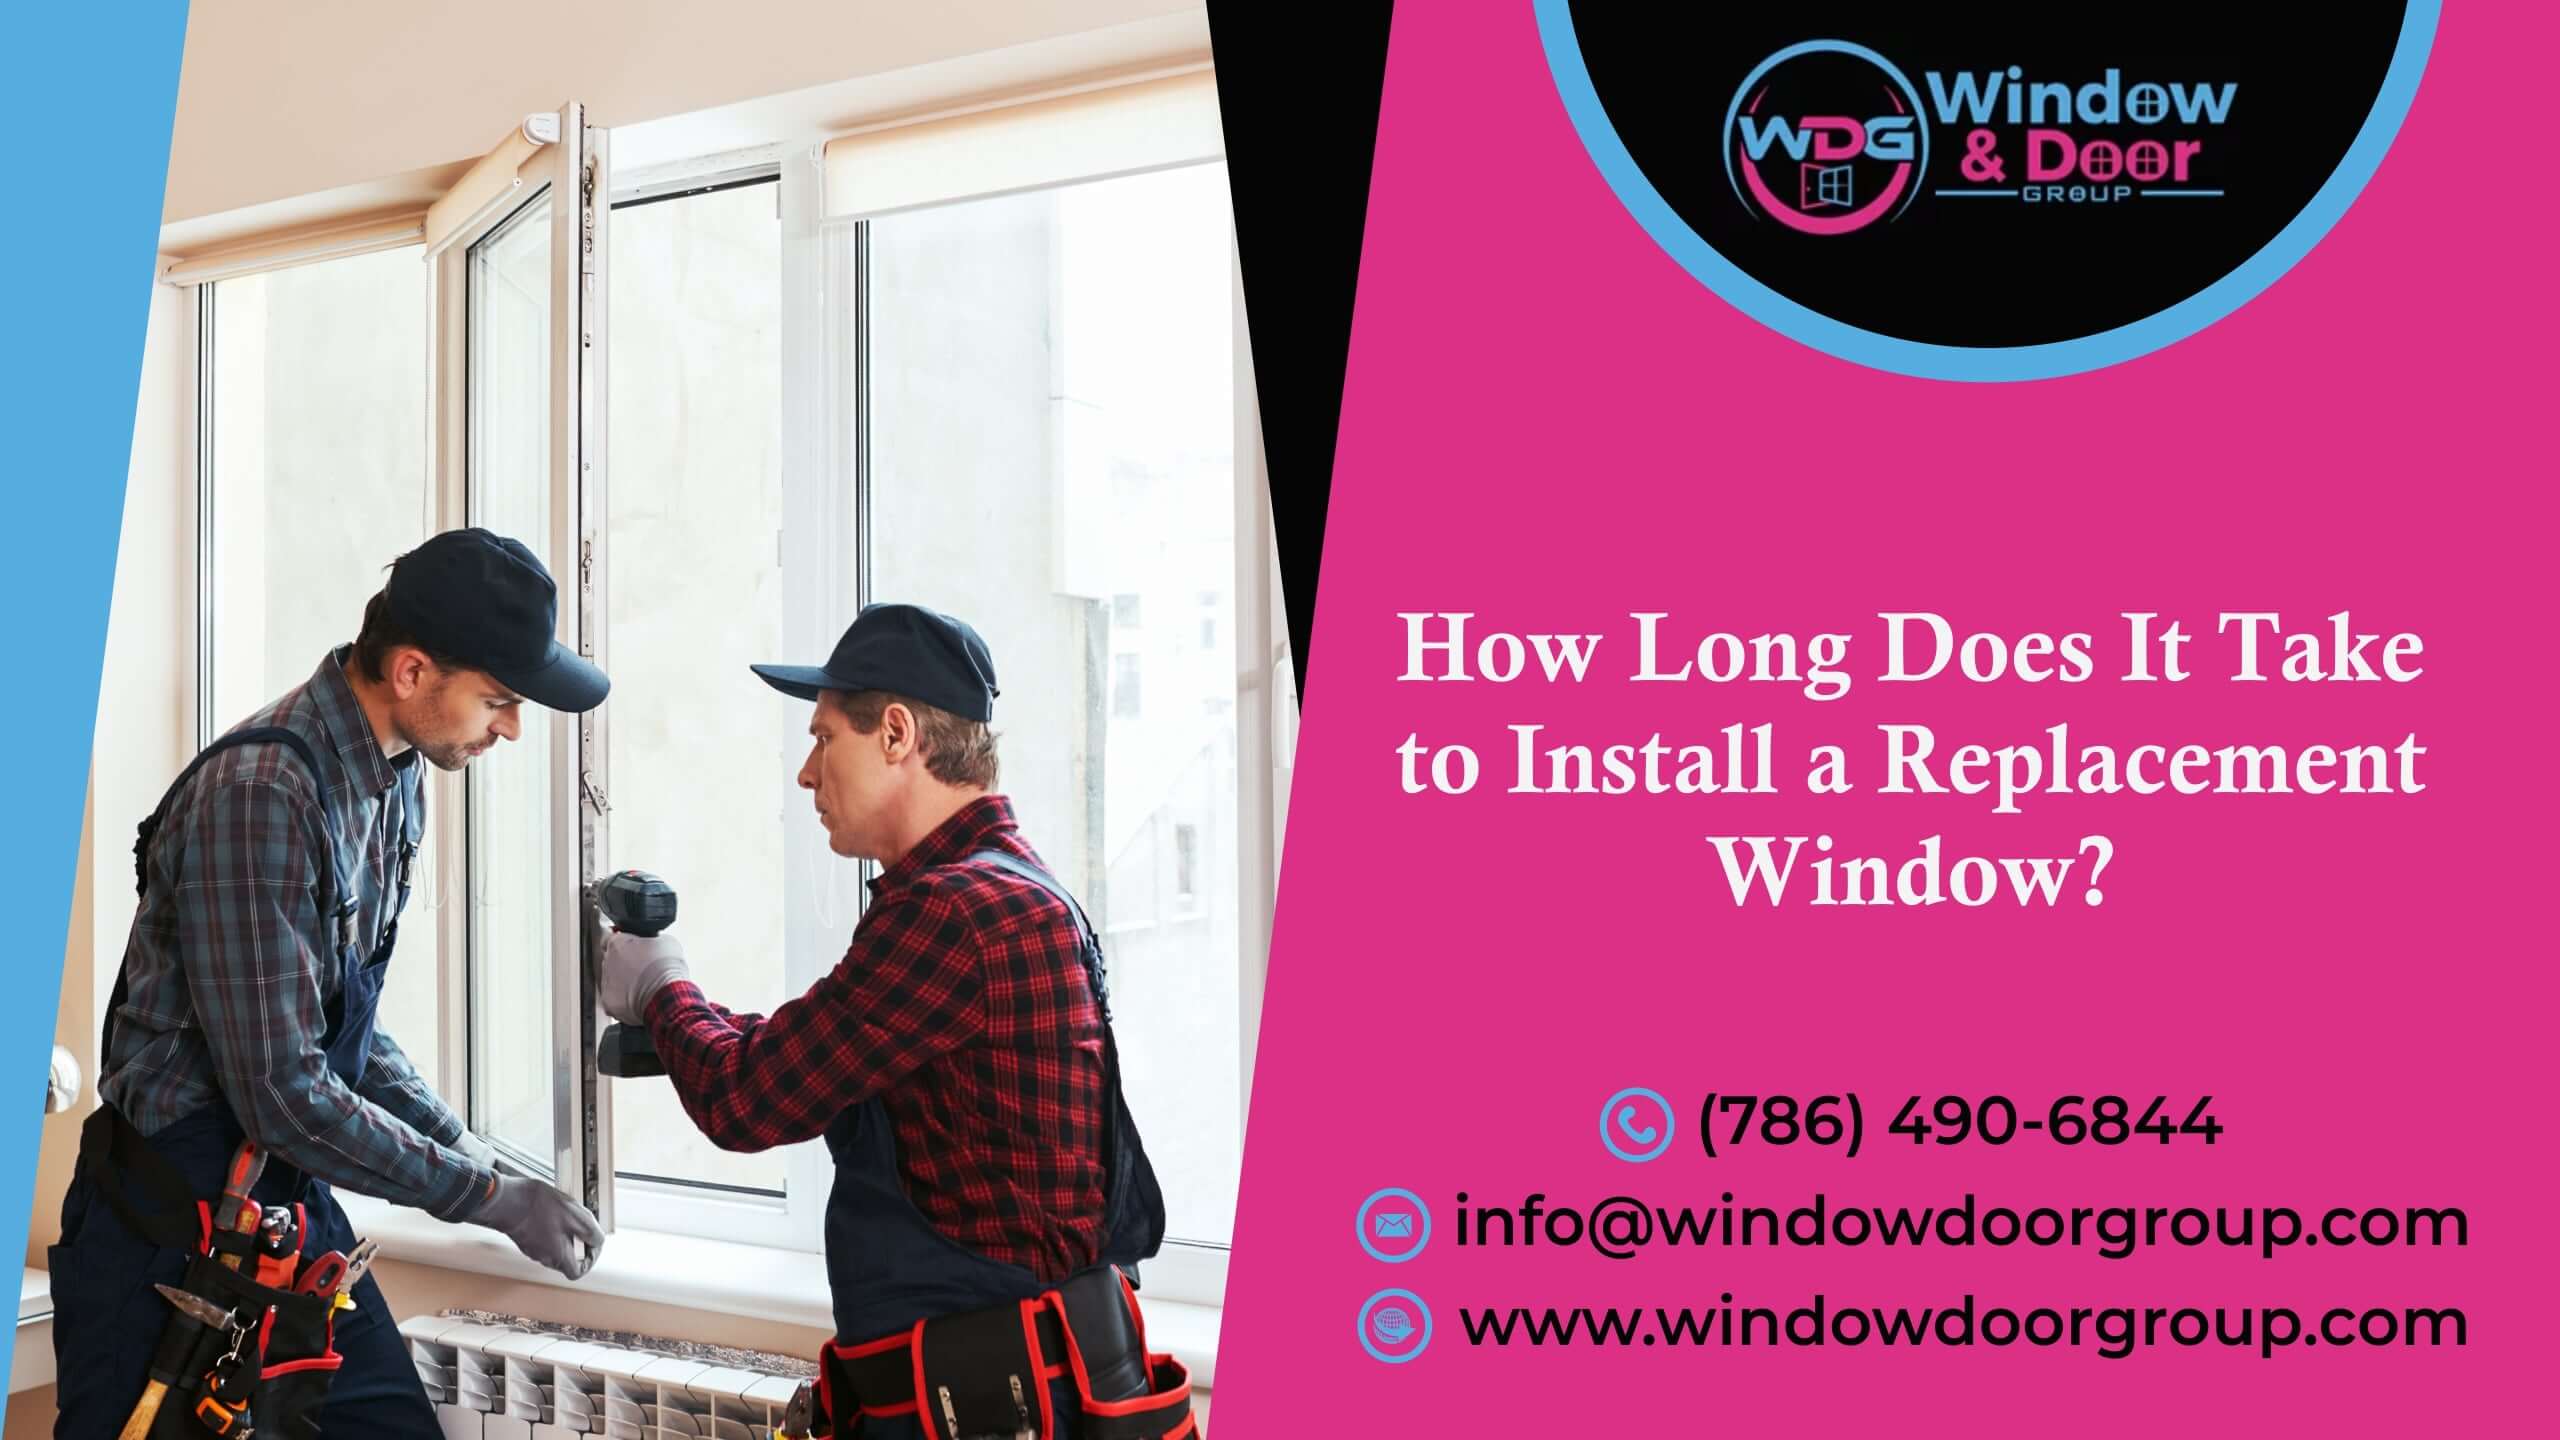 How Long Does It Take To Install A Replacement Window?